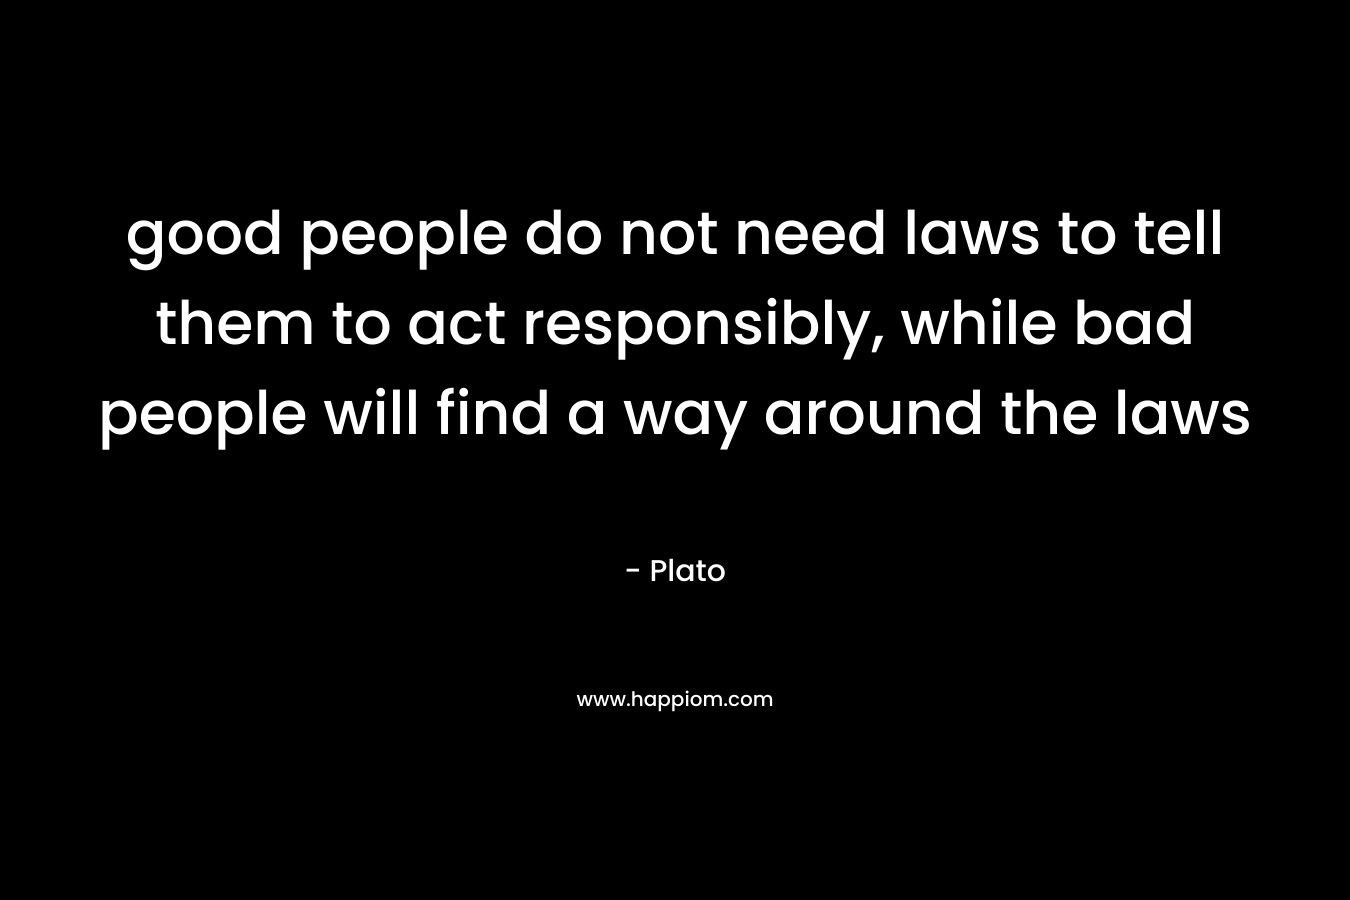 good people do not need laws to tell them to act responsibly, while bad people will find a way around the laws